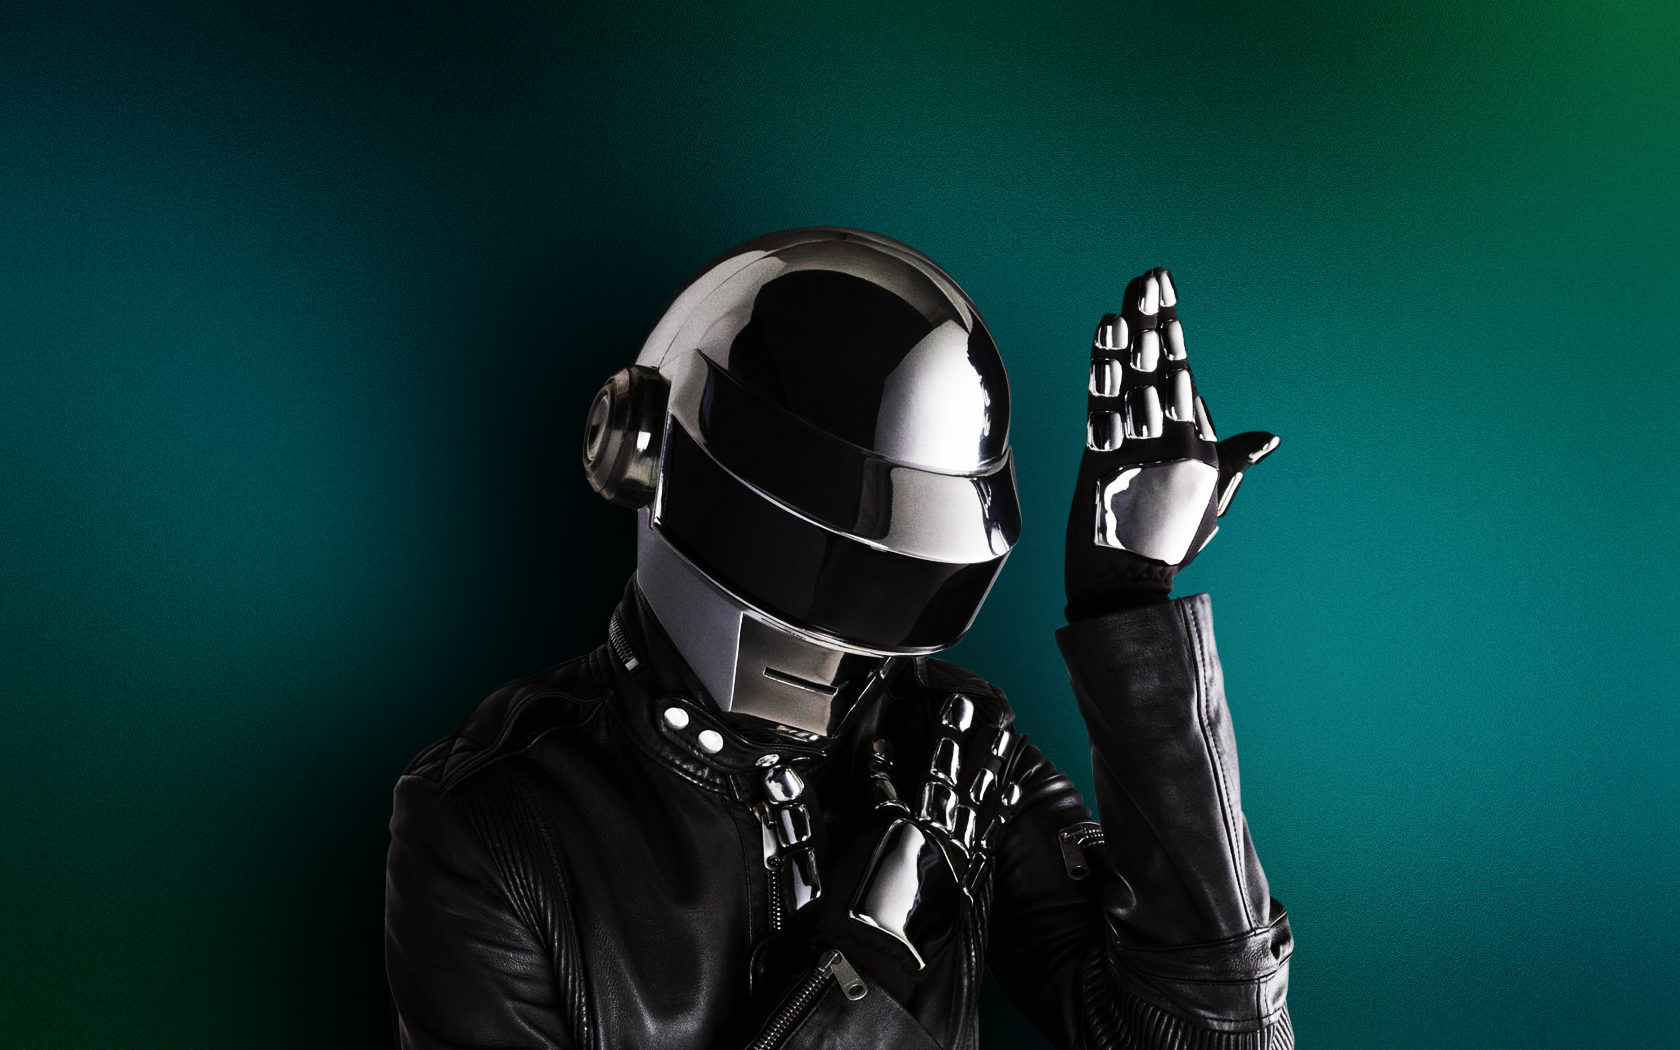 Daft Punk Wallpaper and Background Image | 1680x1050 | ID ...